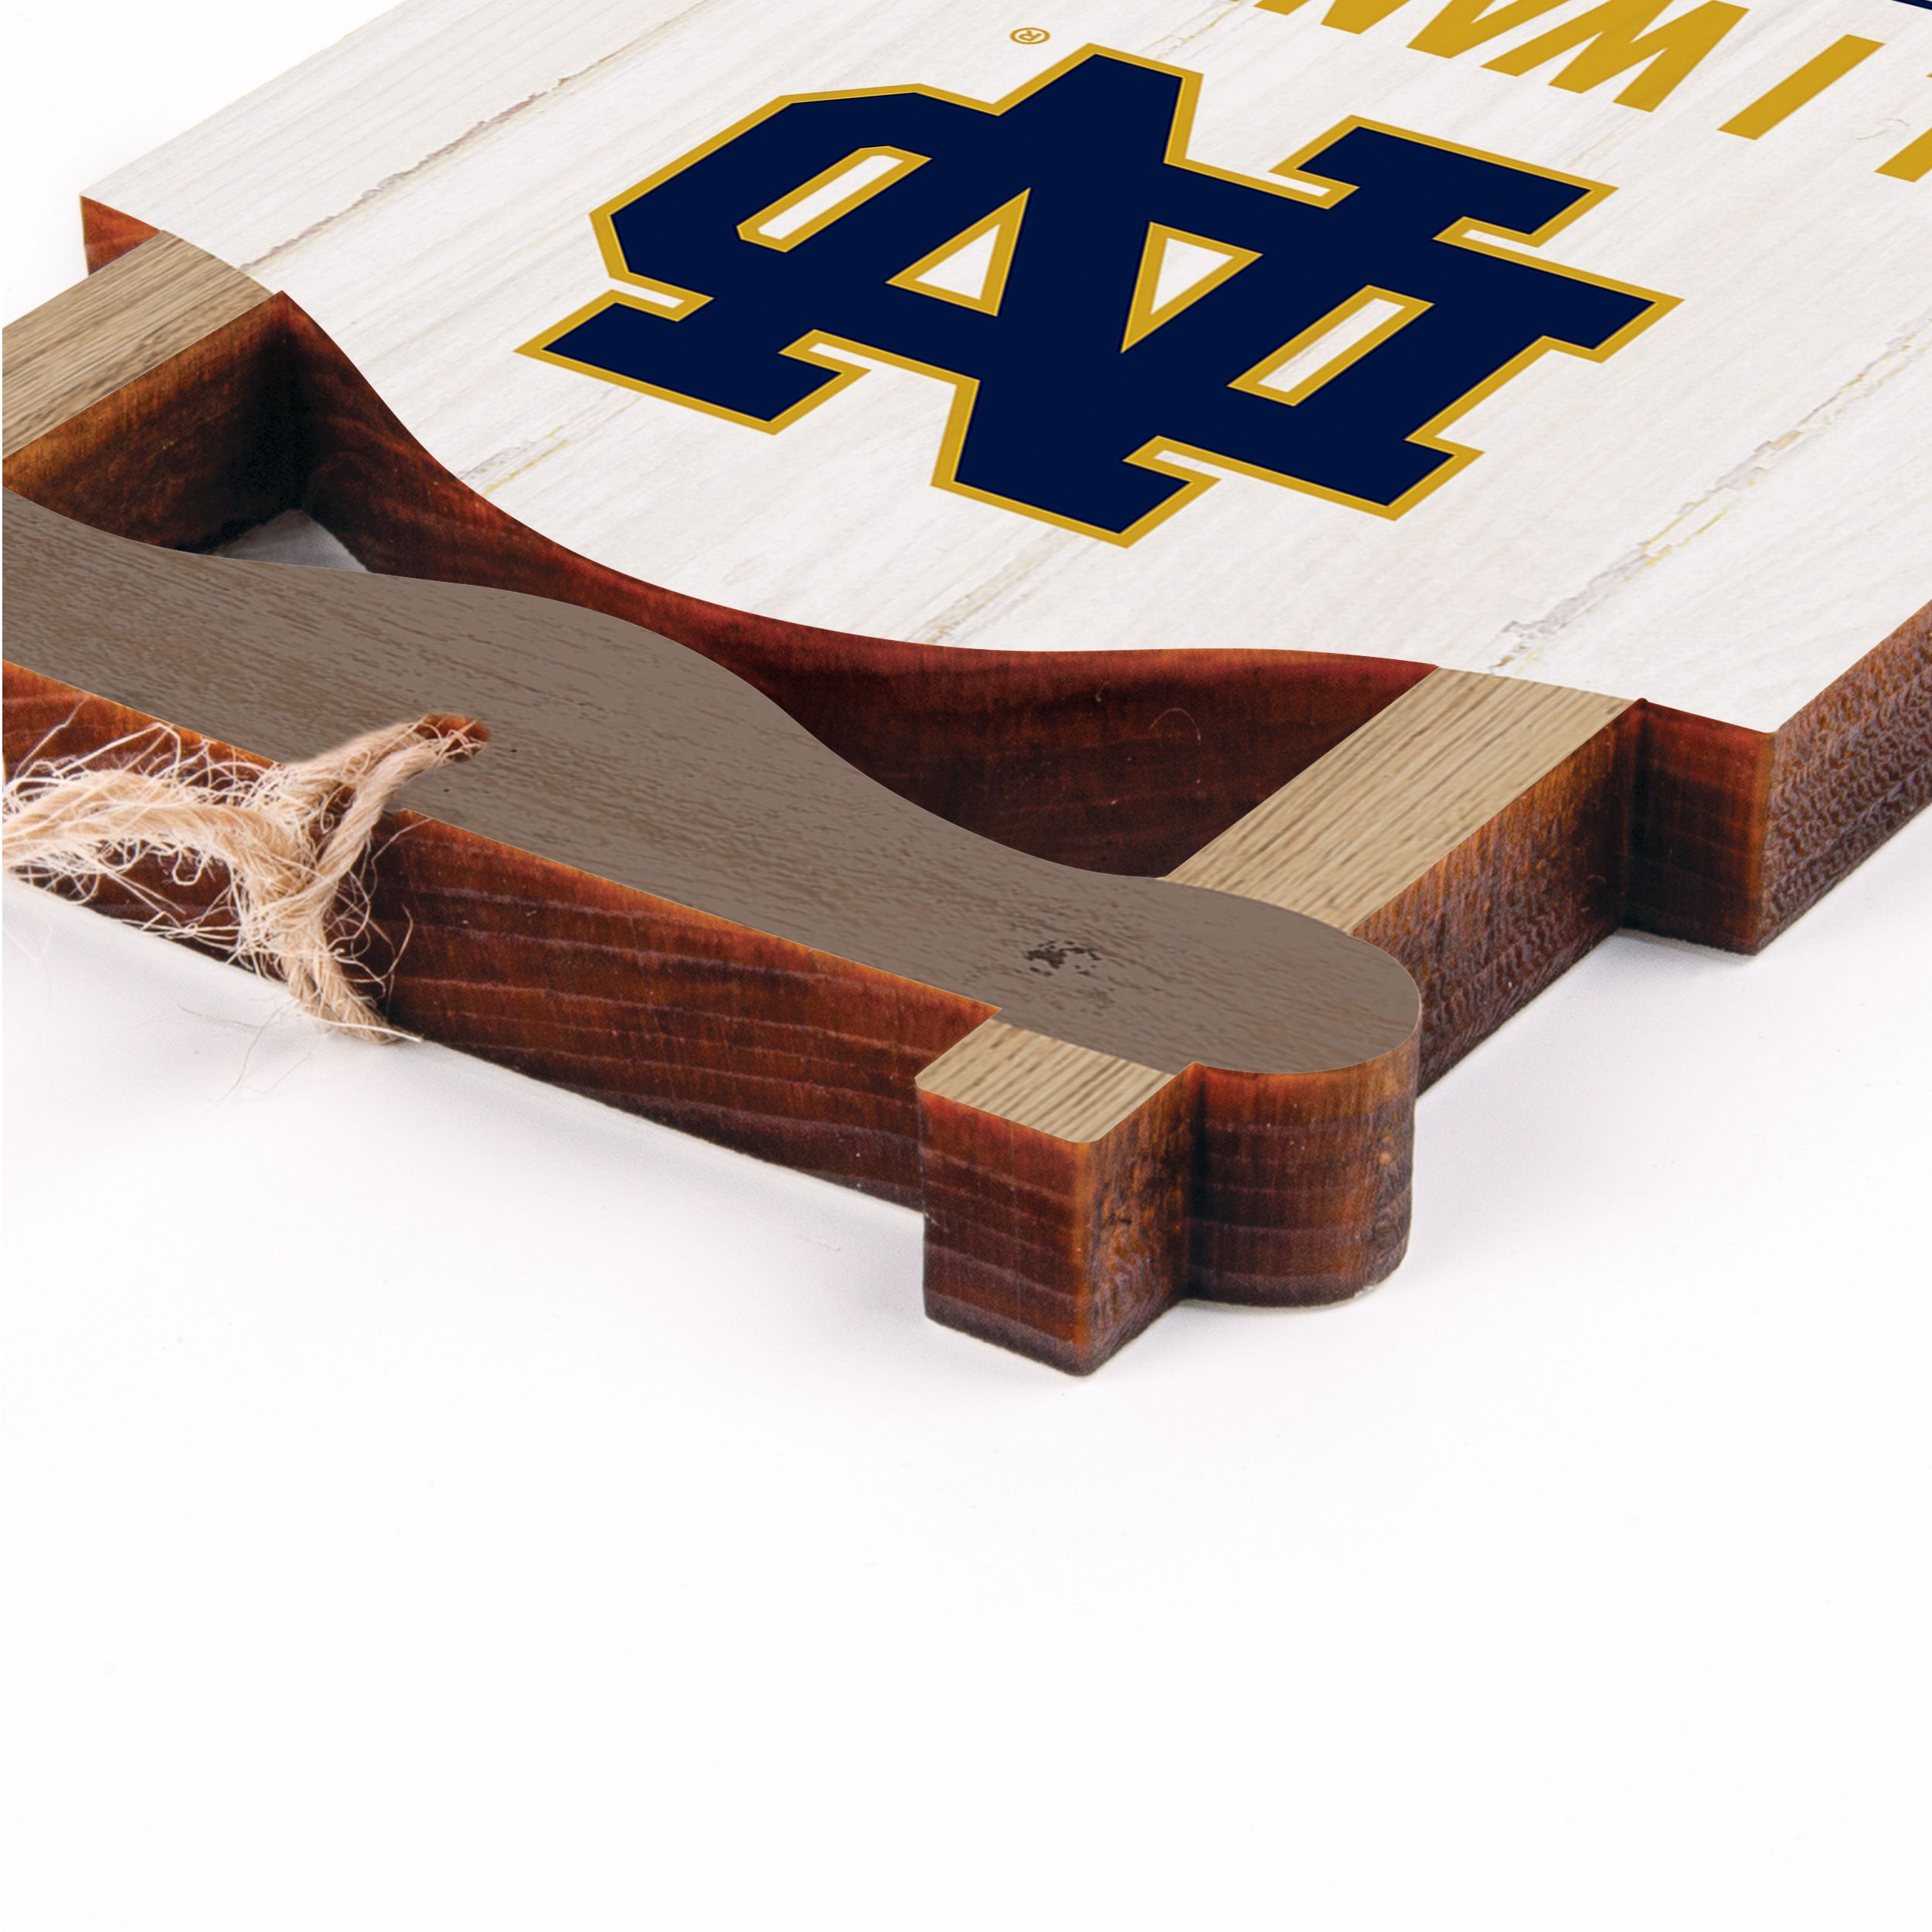 All I Want for Christmas is a Championship - University of Notre Dame Sled Ornament